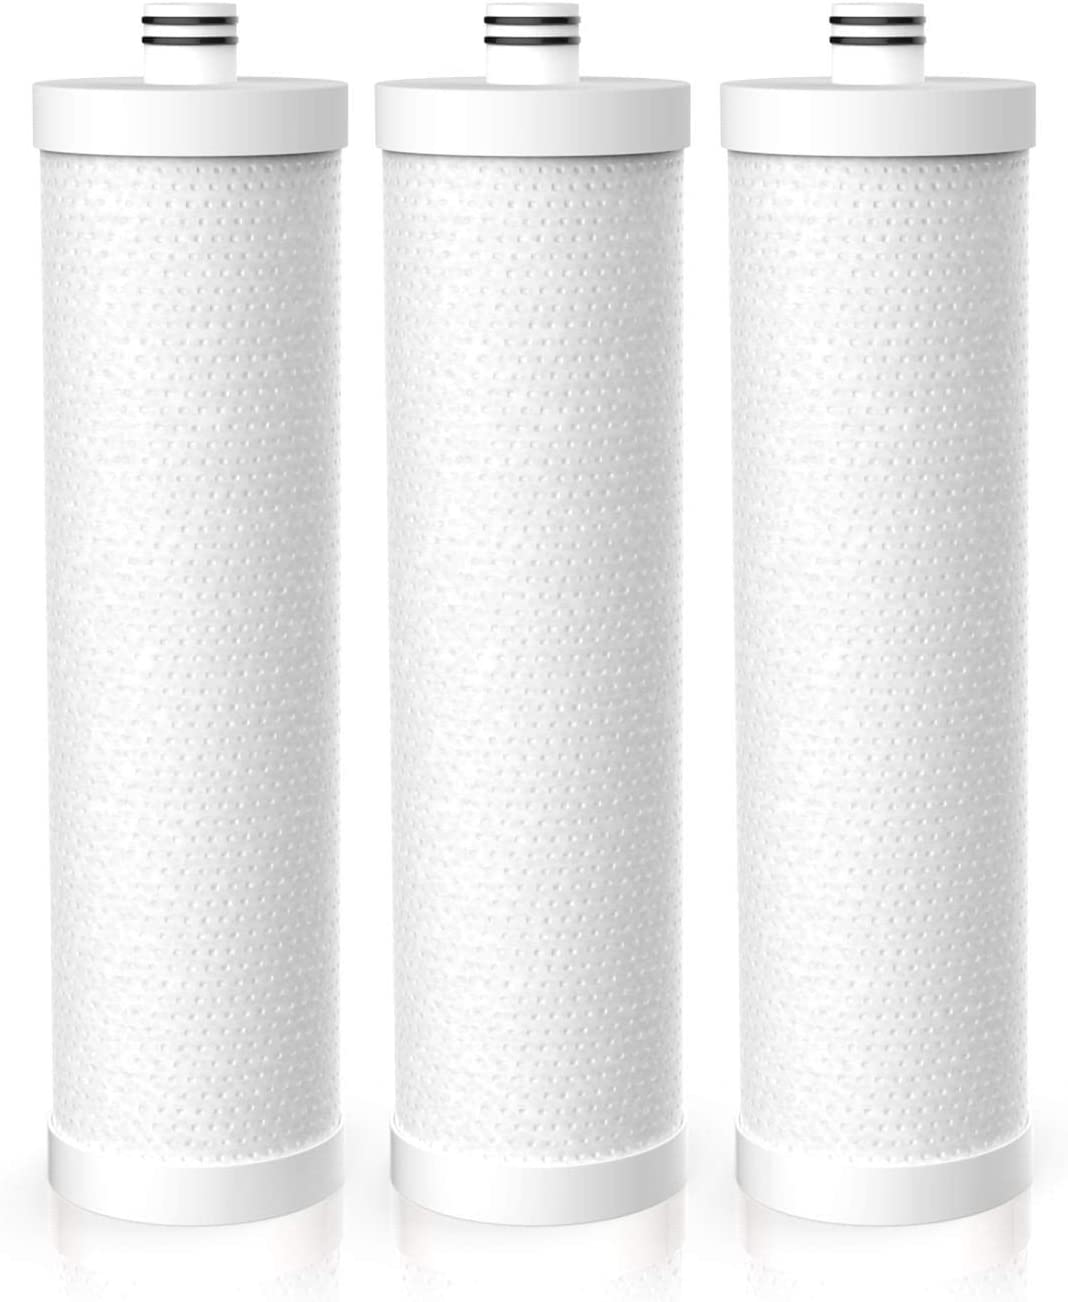 Frizzlife FZ-2 Replacement Filter Cartridge For MP99, MK99, MS99 Under Sink Water Filter & MV99 RV Filter - Pack 3